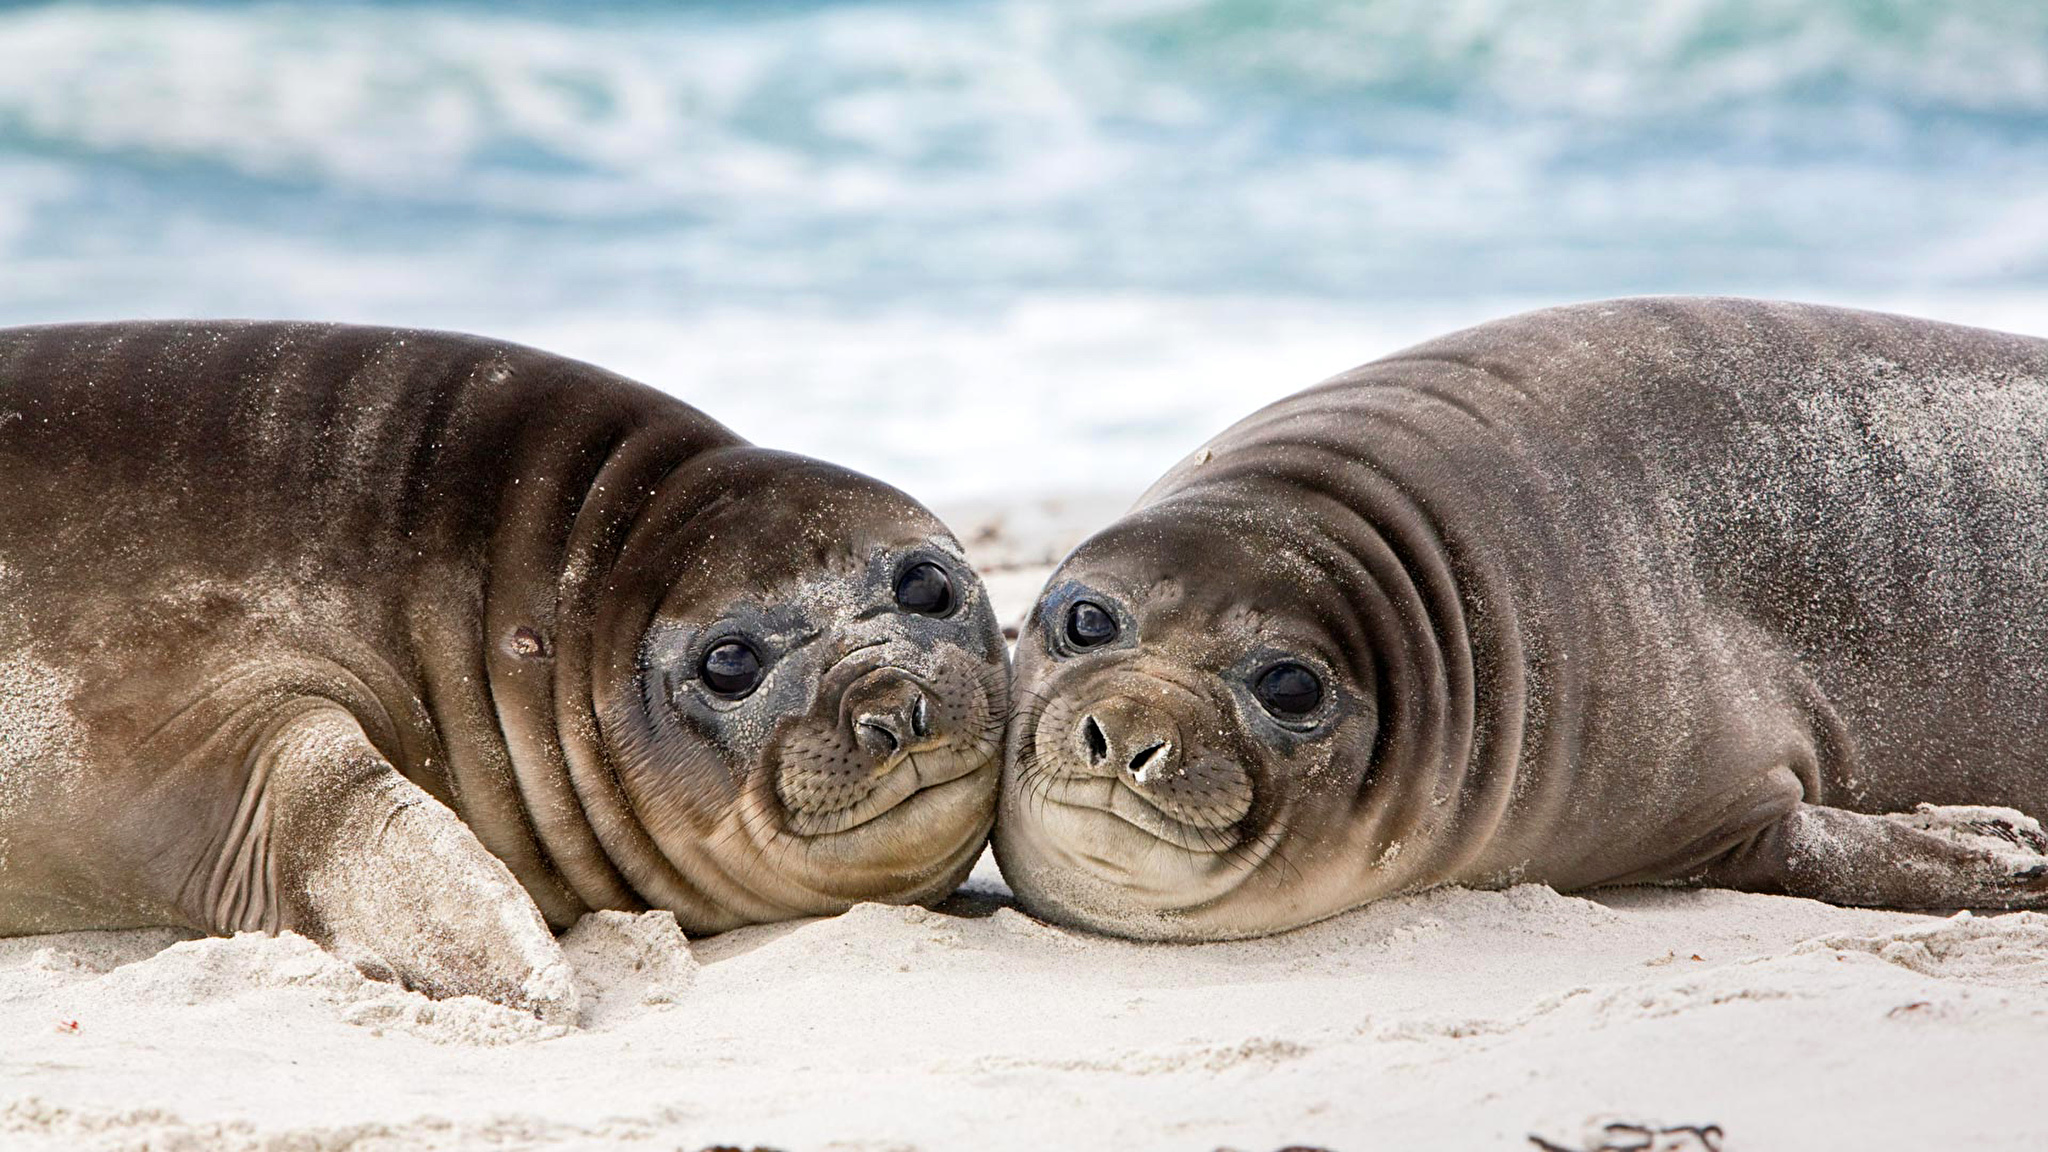 Seals_Eared_seal_Glance_Two_525942_2048x